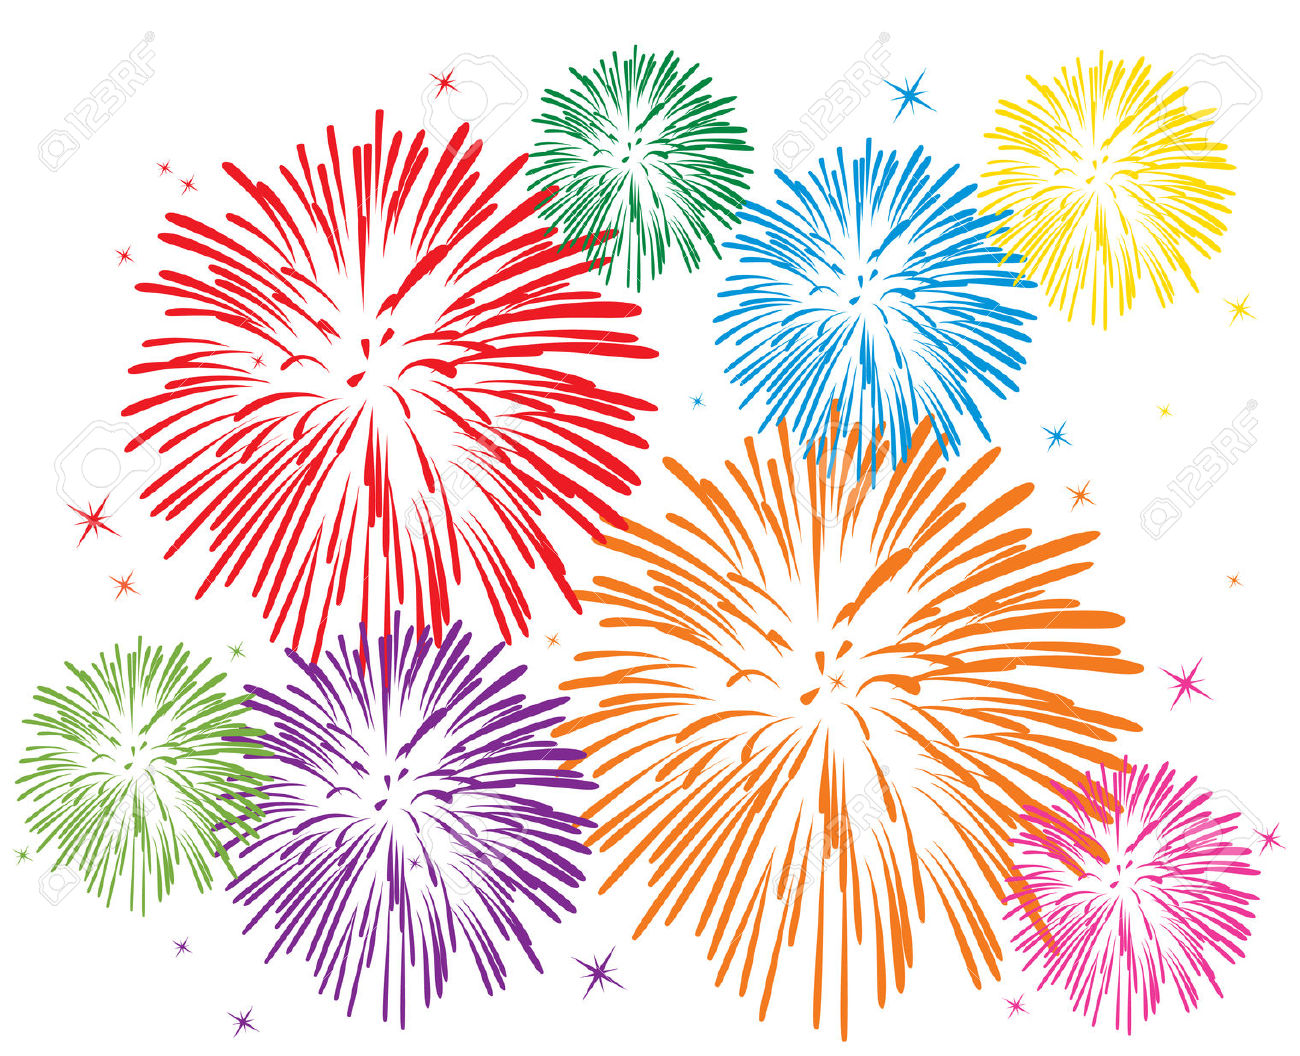 Pin by Carol on Clipart & illustrations A  How to draw fireworks,  Fireworks clipart, Fireworks art